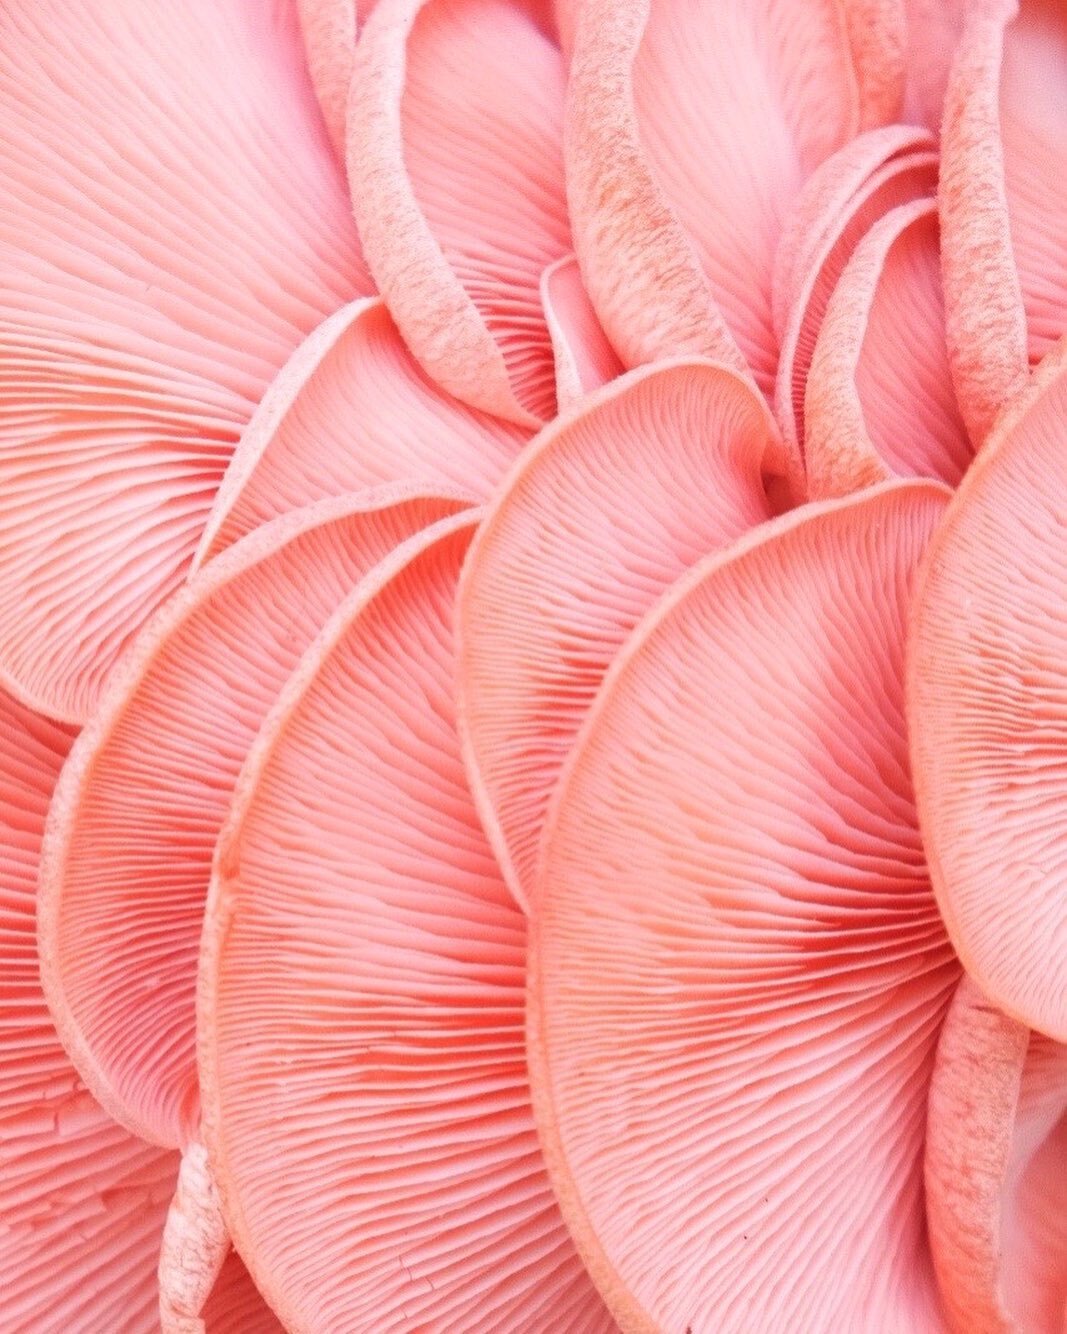 Pink Flamingo Oyster Mushrooms, I mean truly....

These absolute stunners are from @jamesbklyn who not only procured these but offered them as a *replacement* when the original mushrooms I was after weren&rsquo;t available.

Just want to pause for a 